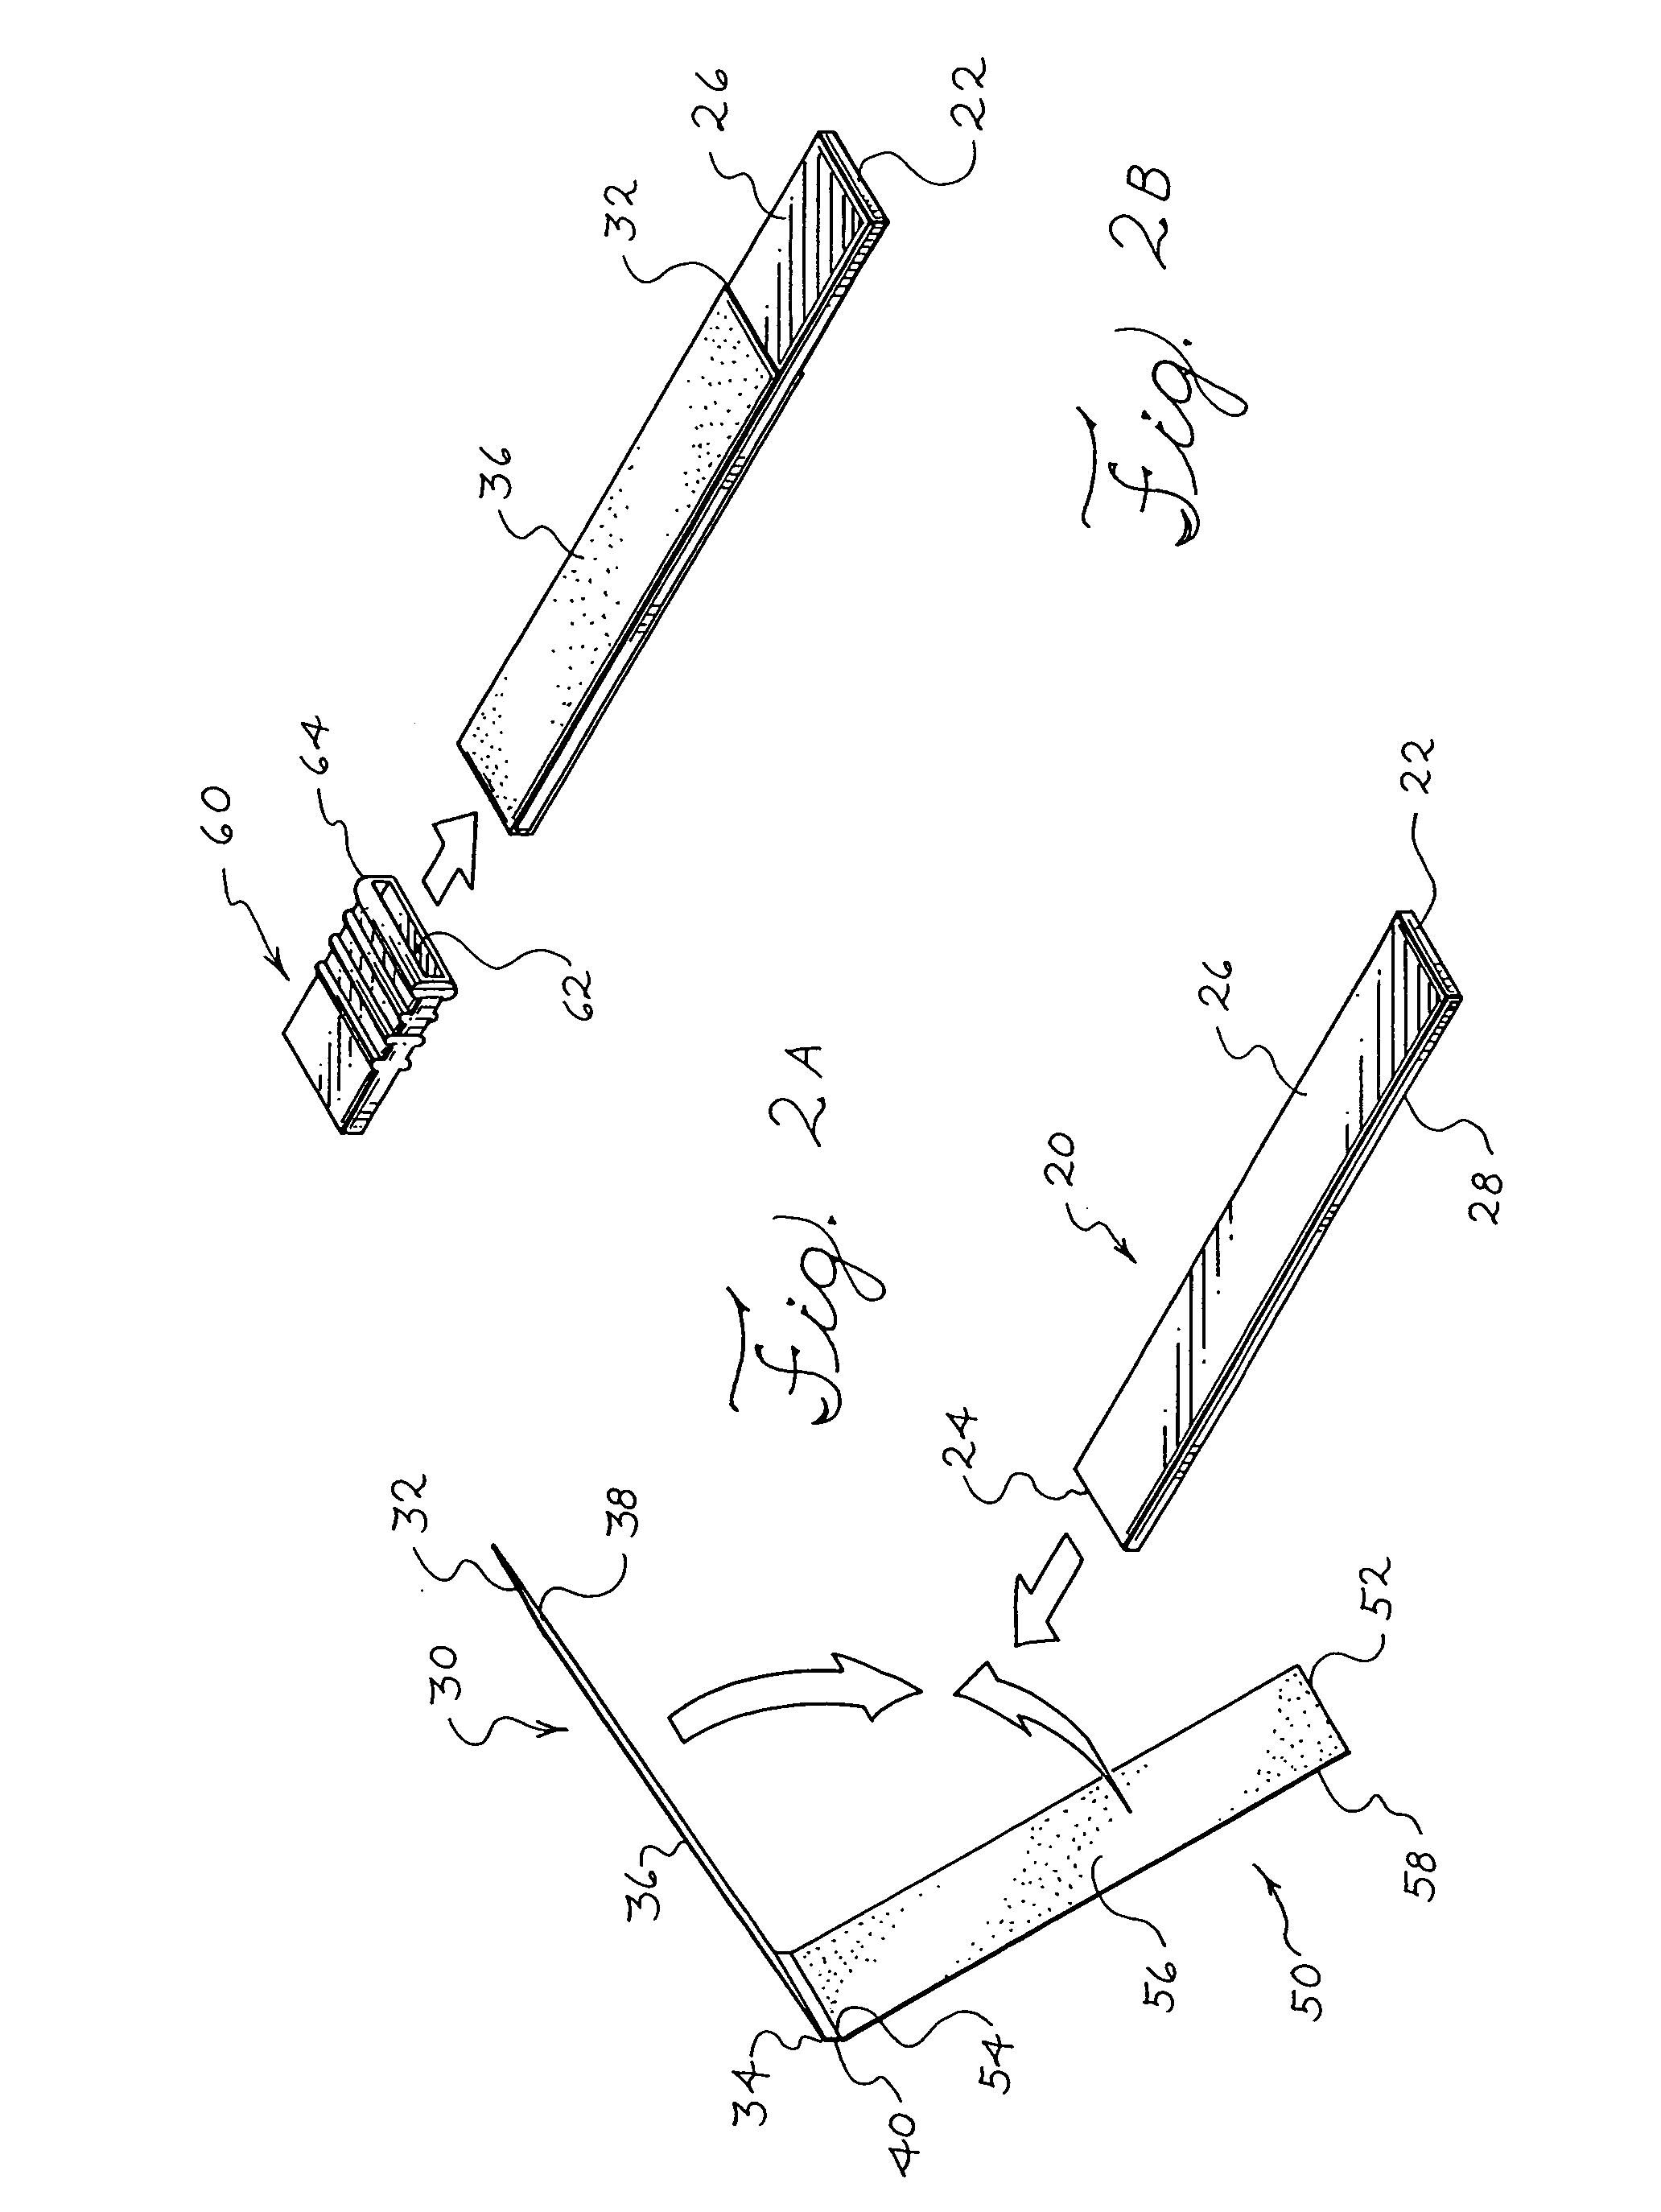 Apparatus and method for producing a reinforced surgical staple line